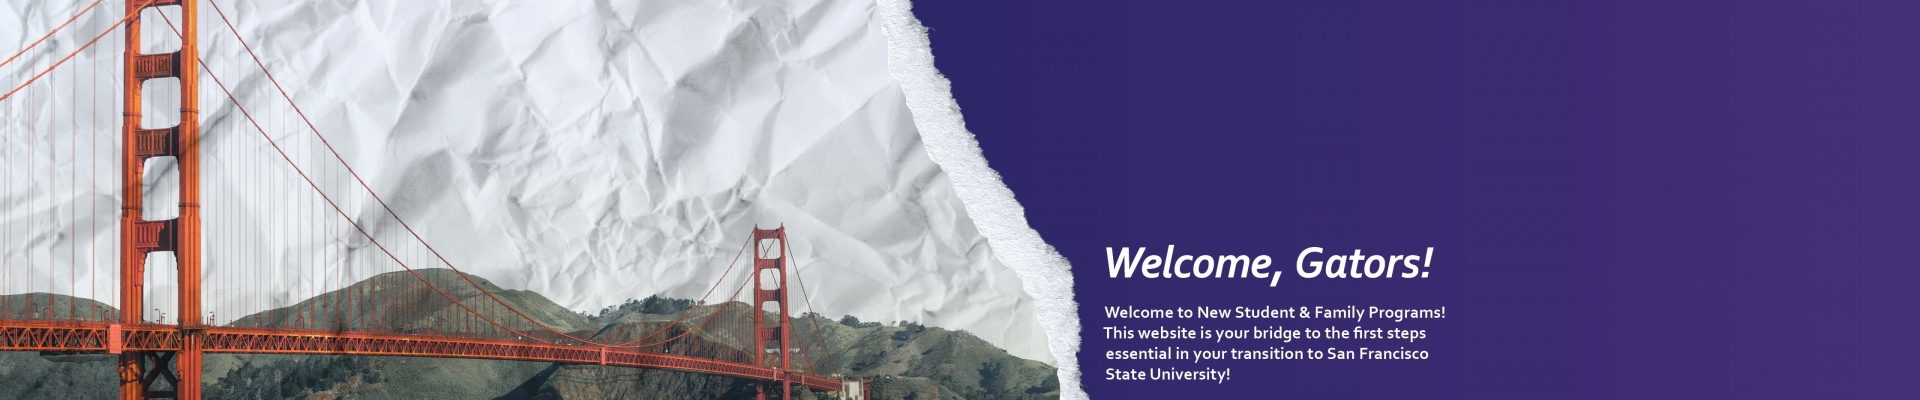 Welcome to New Student & Family Programs! This website is designed to bridge you to the essential first steps to your transition to San Francisco State University!